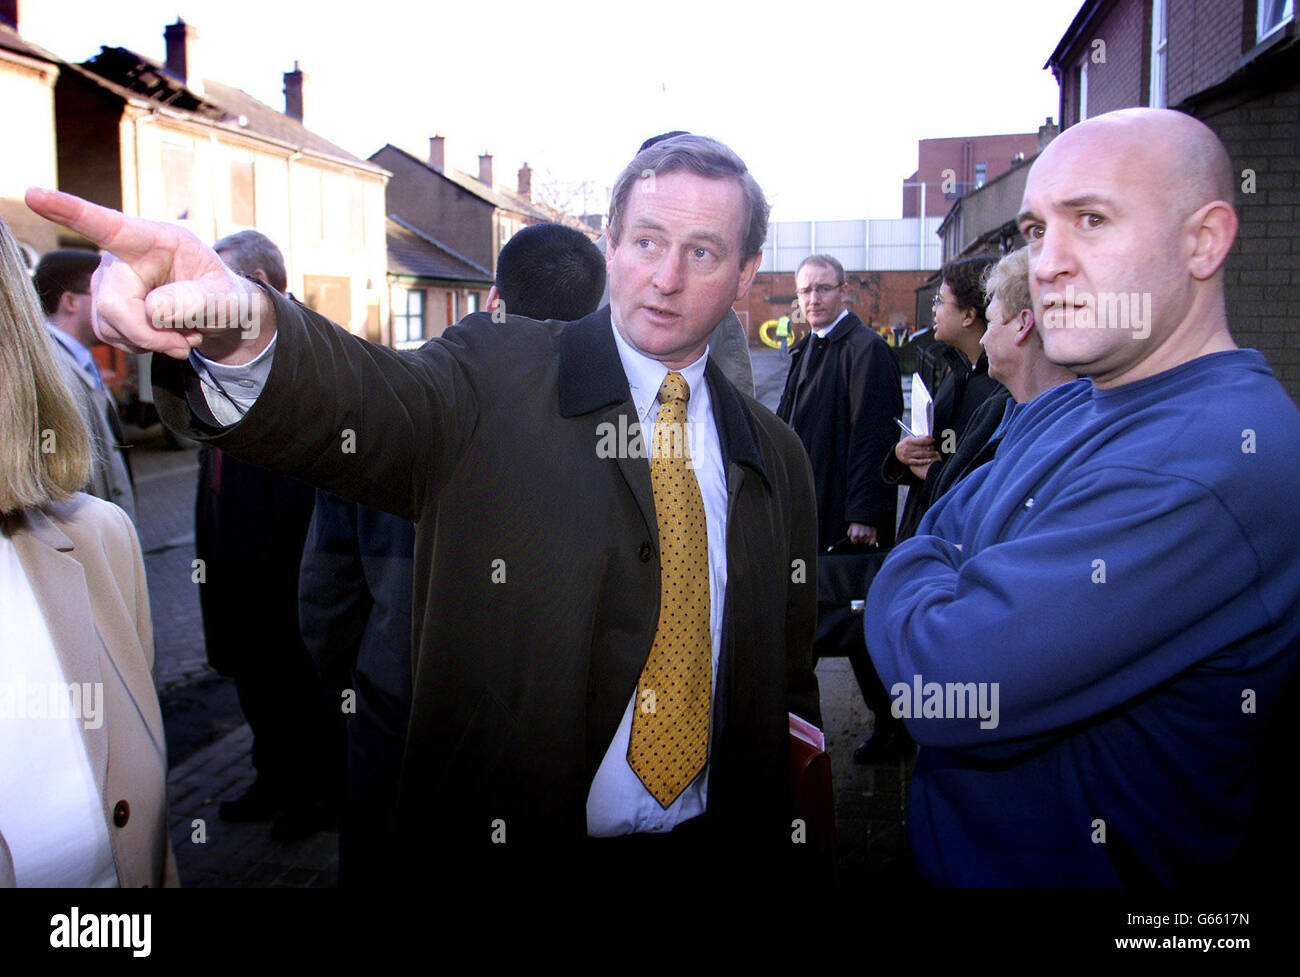 Fine Gael Leader Enda Kenny (left) chats with residents of Cluan Place in East Belfast, during his visit to the loyalist side of the peace line. * After meeting residents in Cluan Place, which has seen some of the worst rioting in Belfast over the past year, Mr Kenny said: I think we should focus in on the real areas of dissent and on areas where we feel we can make a breakthrough. Stock Photo